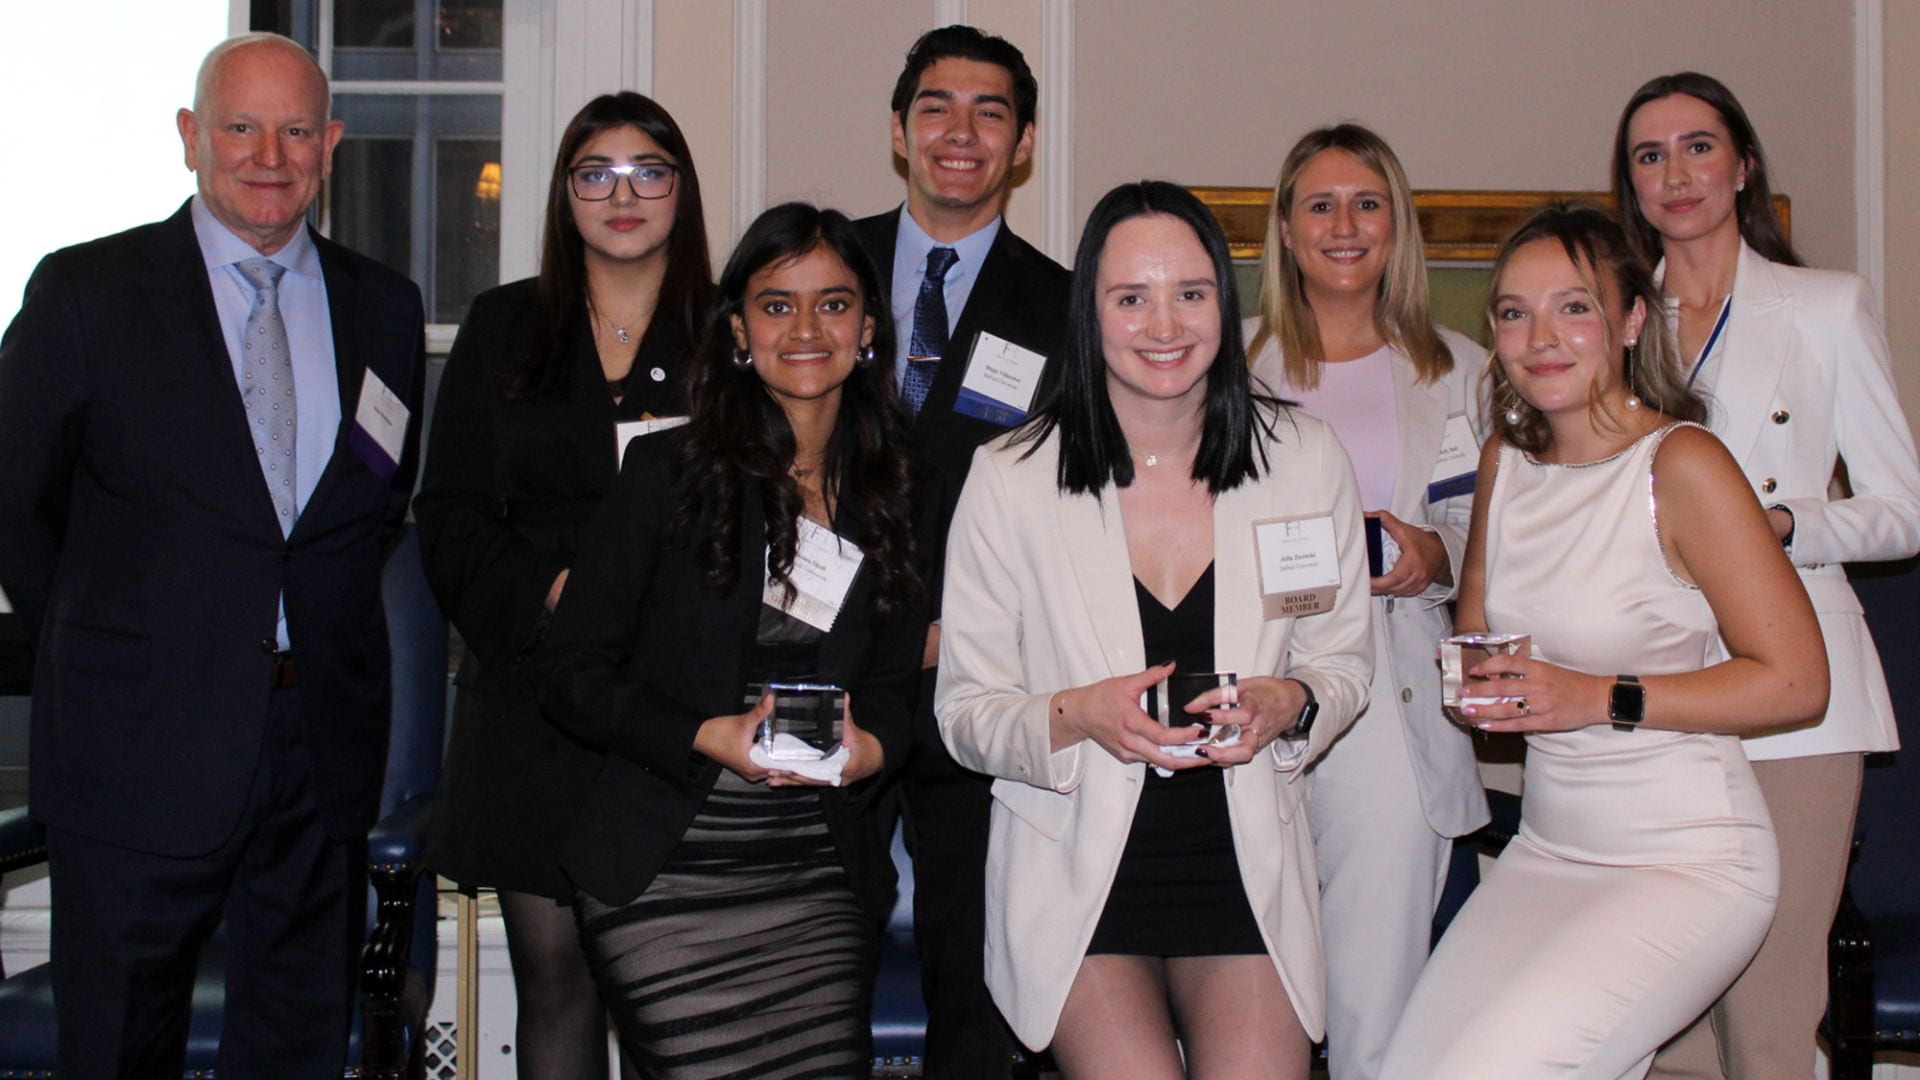 Lori Holland Emerging Leaders (front row, L to R), students Desna Shah, Julia Zuzinski and Grace Haucke, celebrate the new Lori Holland Initiative for Women with (back row, L to R) donor Robert A. Holland and Lori Holland Memorial Scholarship winners Faria Mobashar, Diego Villasenor, Molly Ball and Nicole Juszczy.